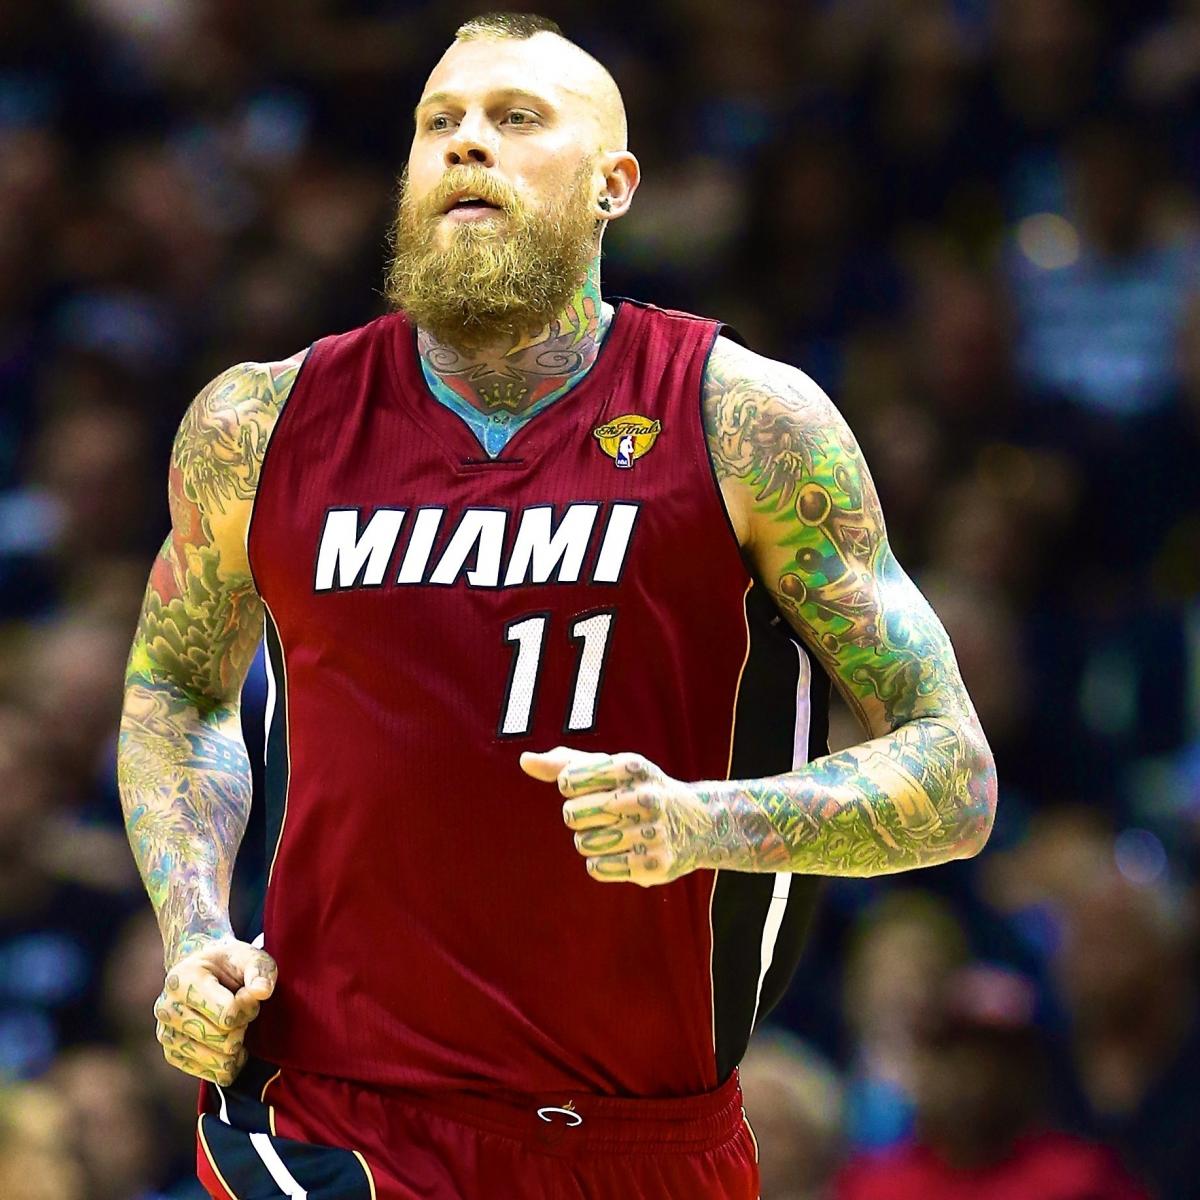 What Really Happened To Chris Andersen? (DRUG ABUSE) 